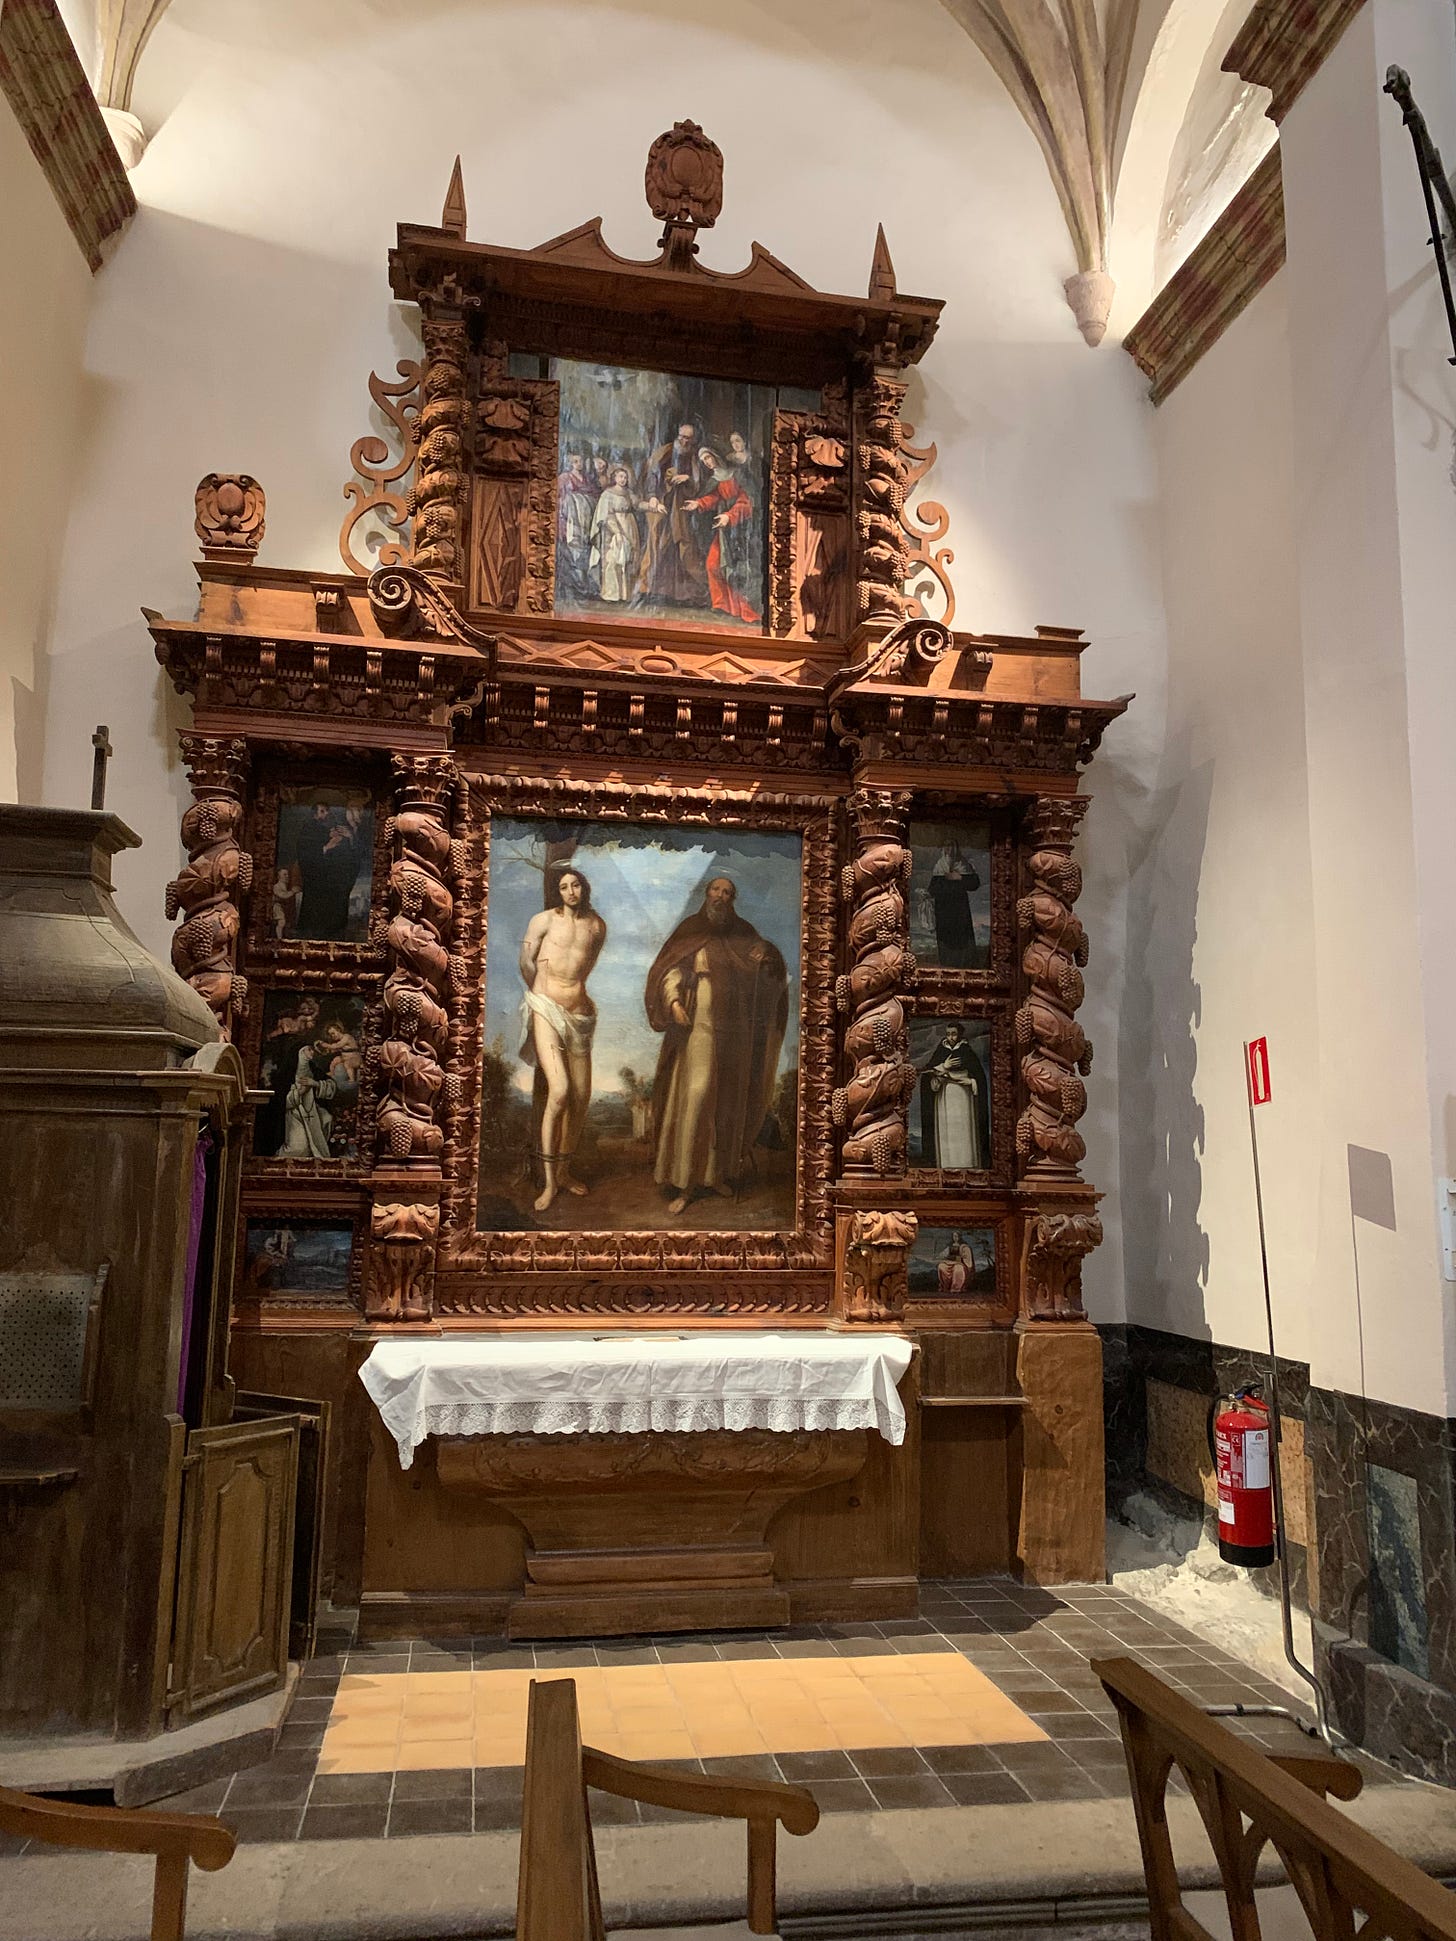 The wooden chapel houses several paintings. It is missing a couple of detailed pieces, but these wouldn't have been considered in the harsh critique!